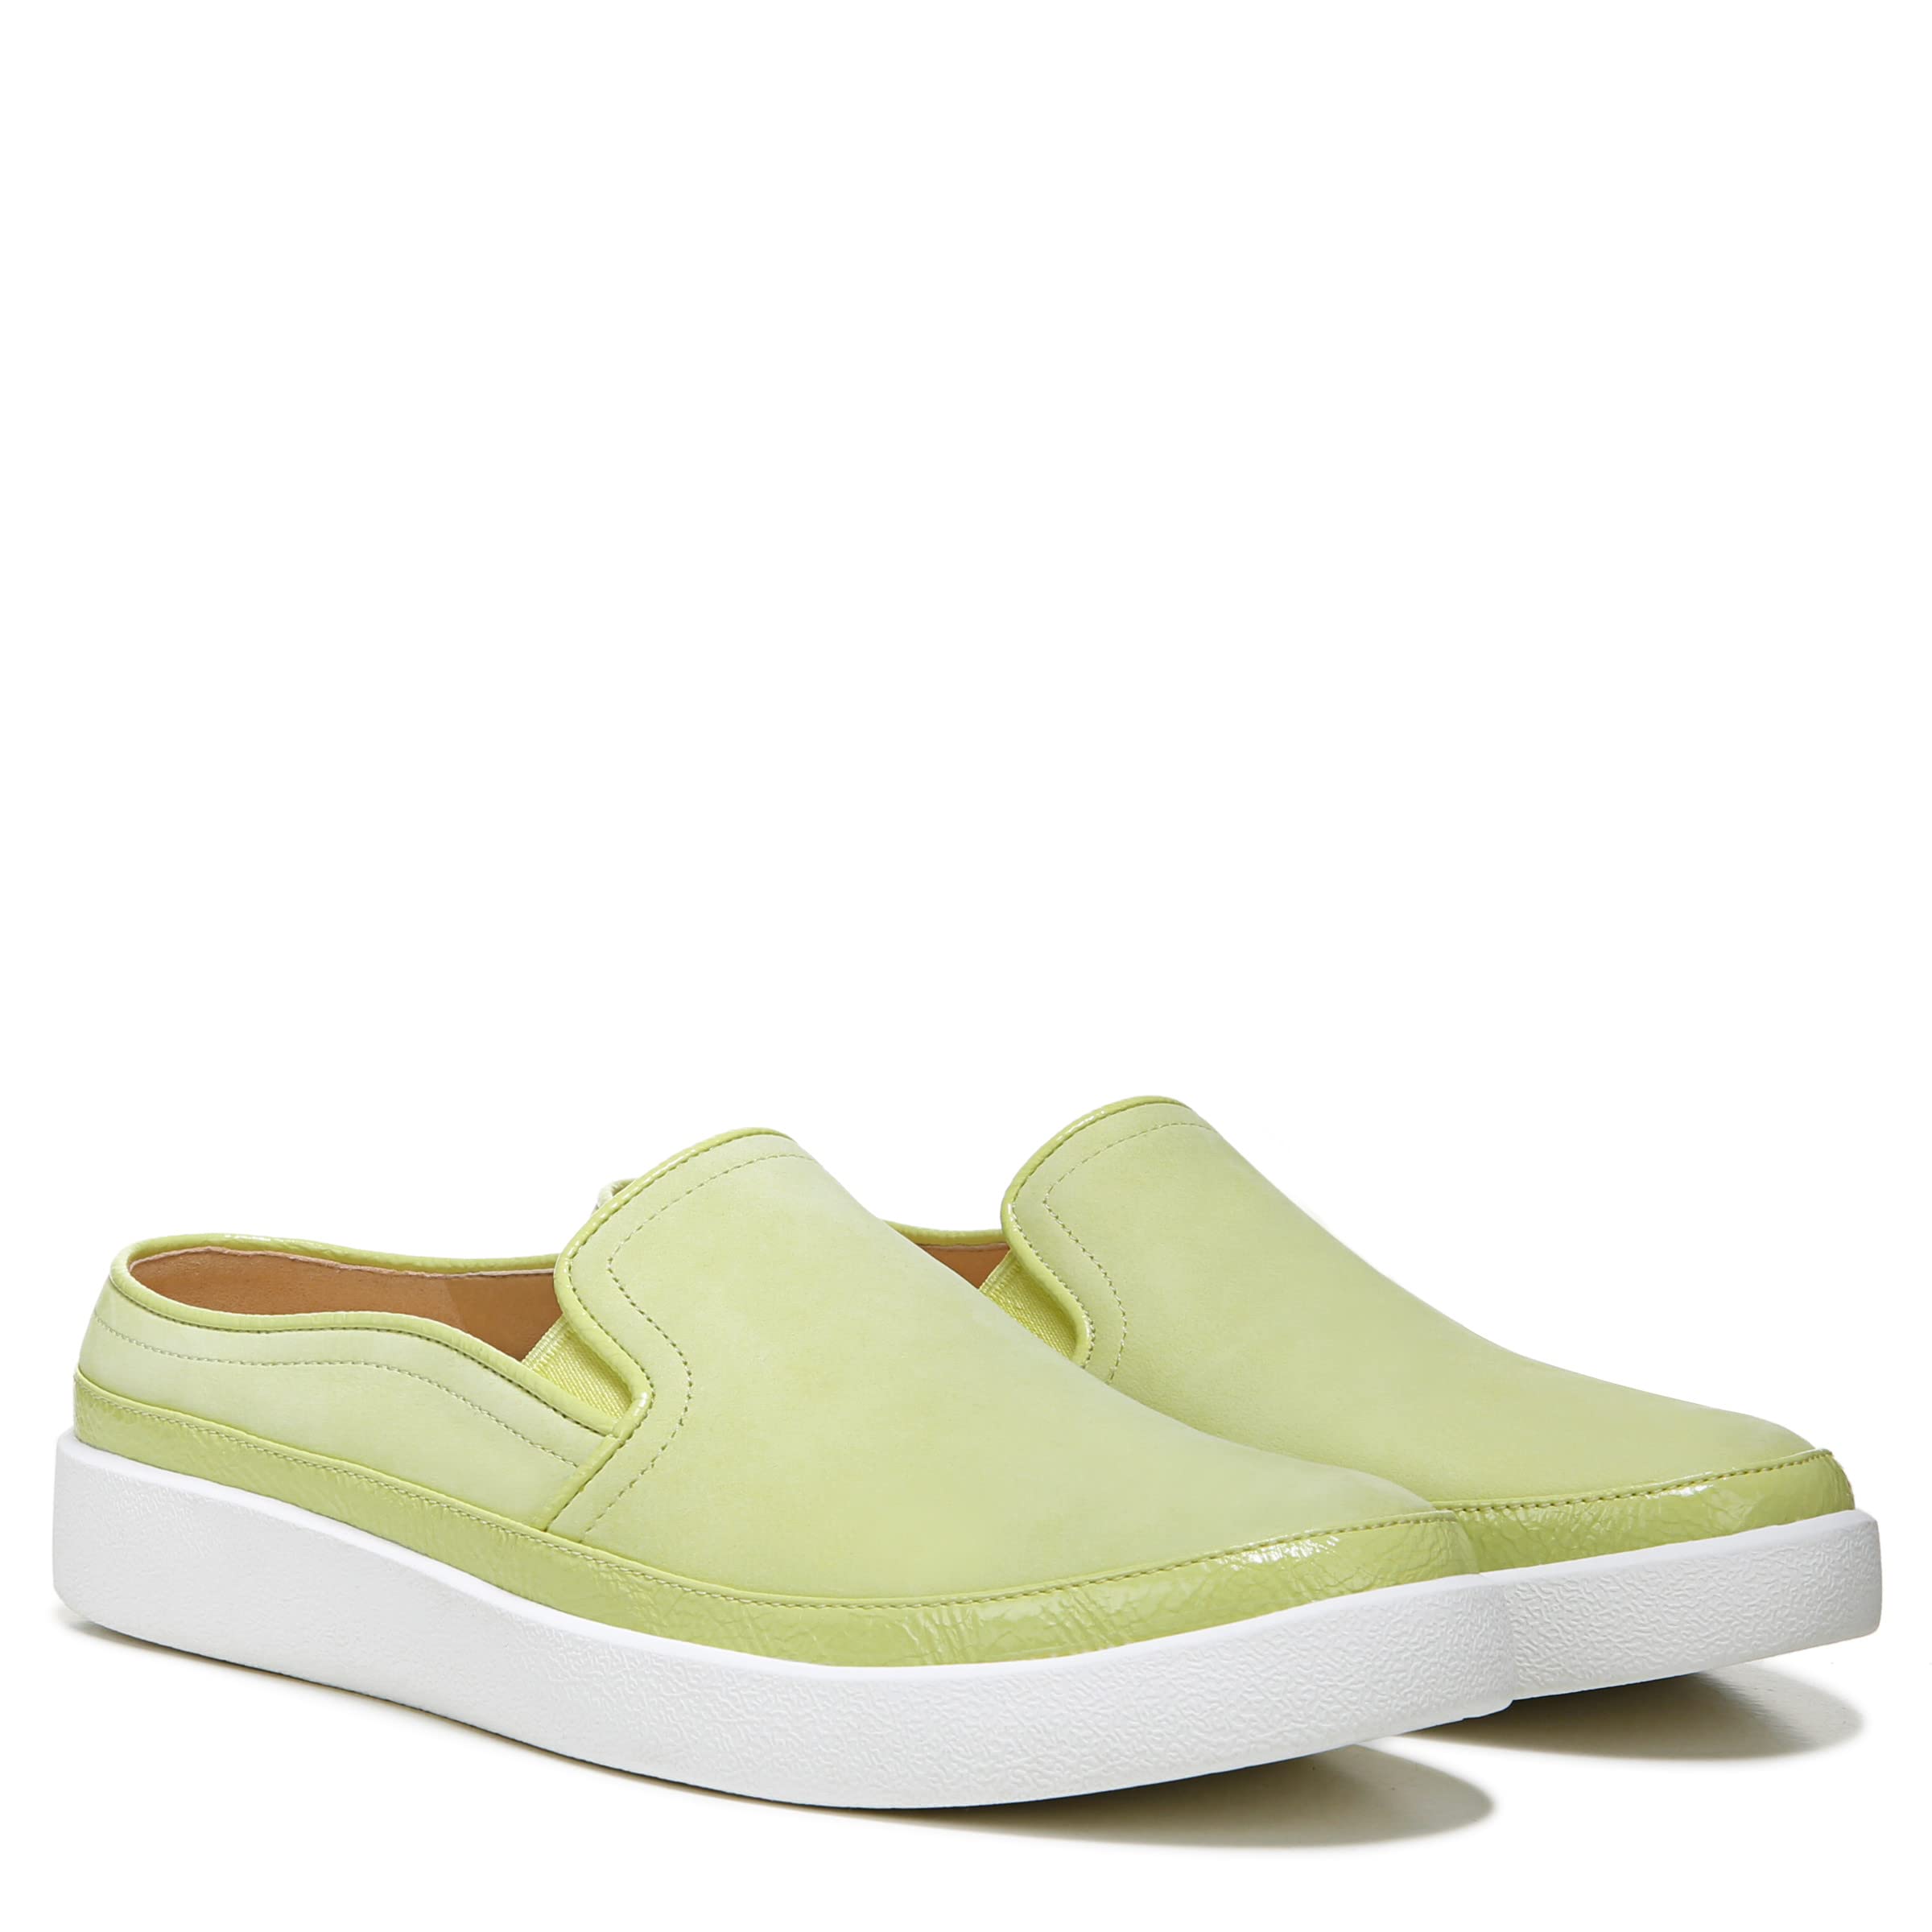 Vionic Effortless Women's Casual Supportive Slip-on S Pale Lime NBK - 9 Medium